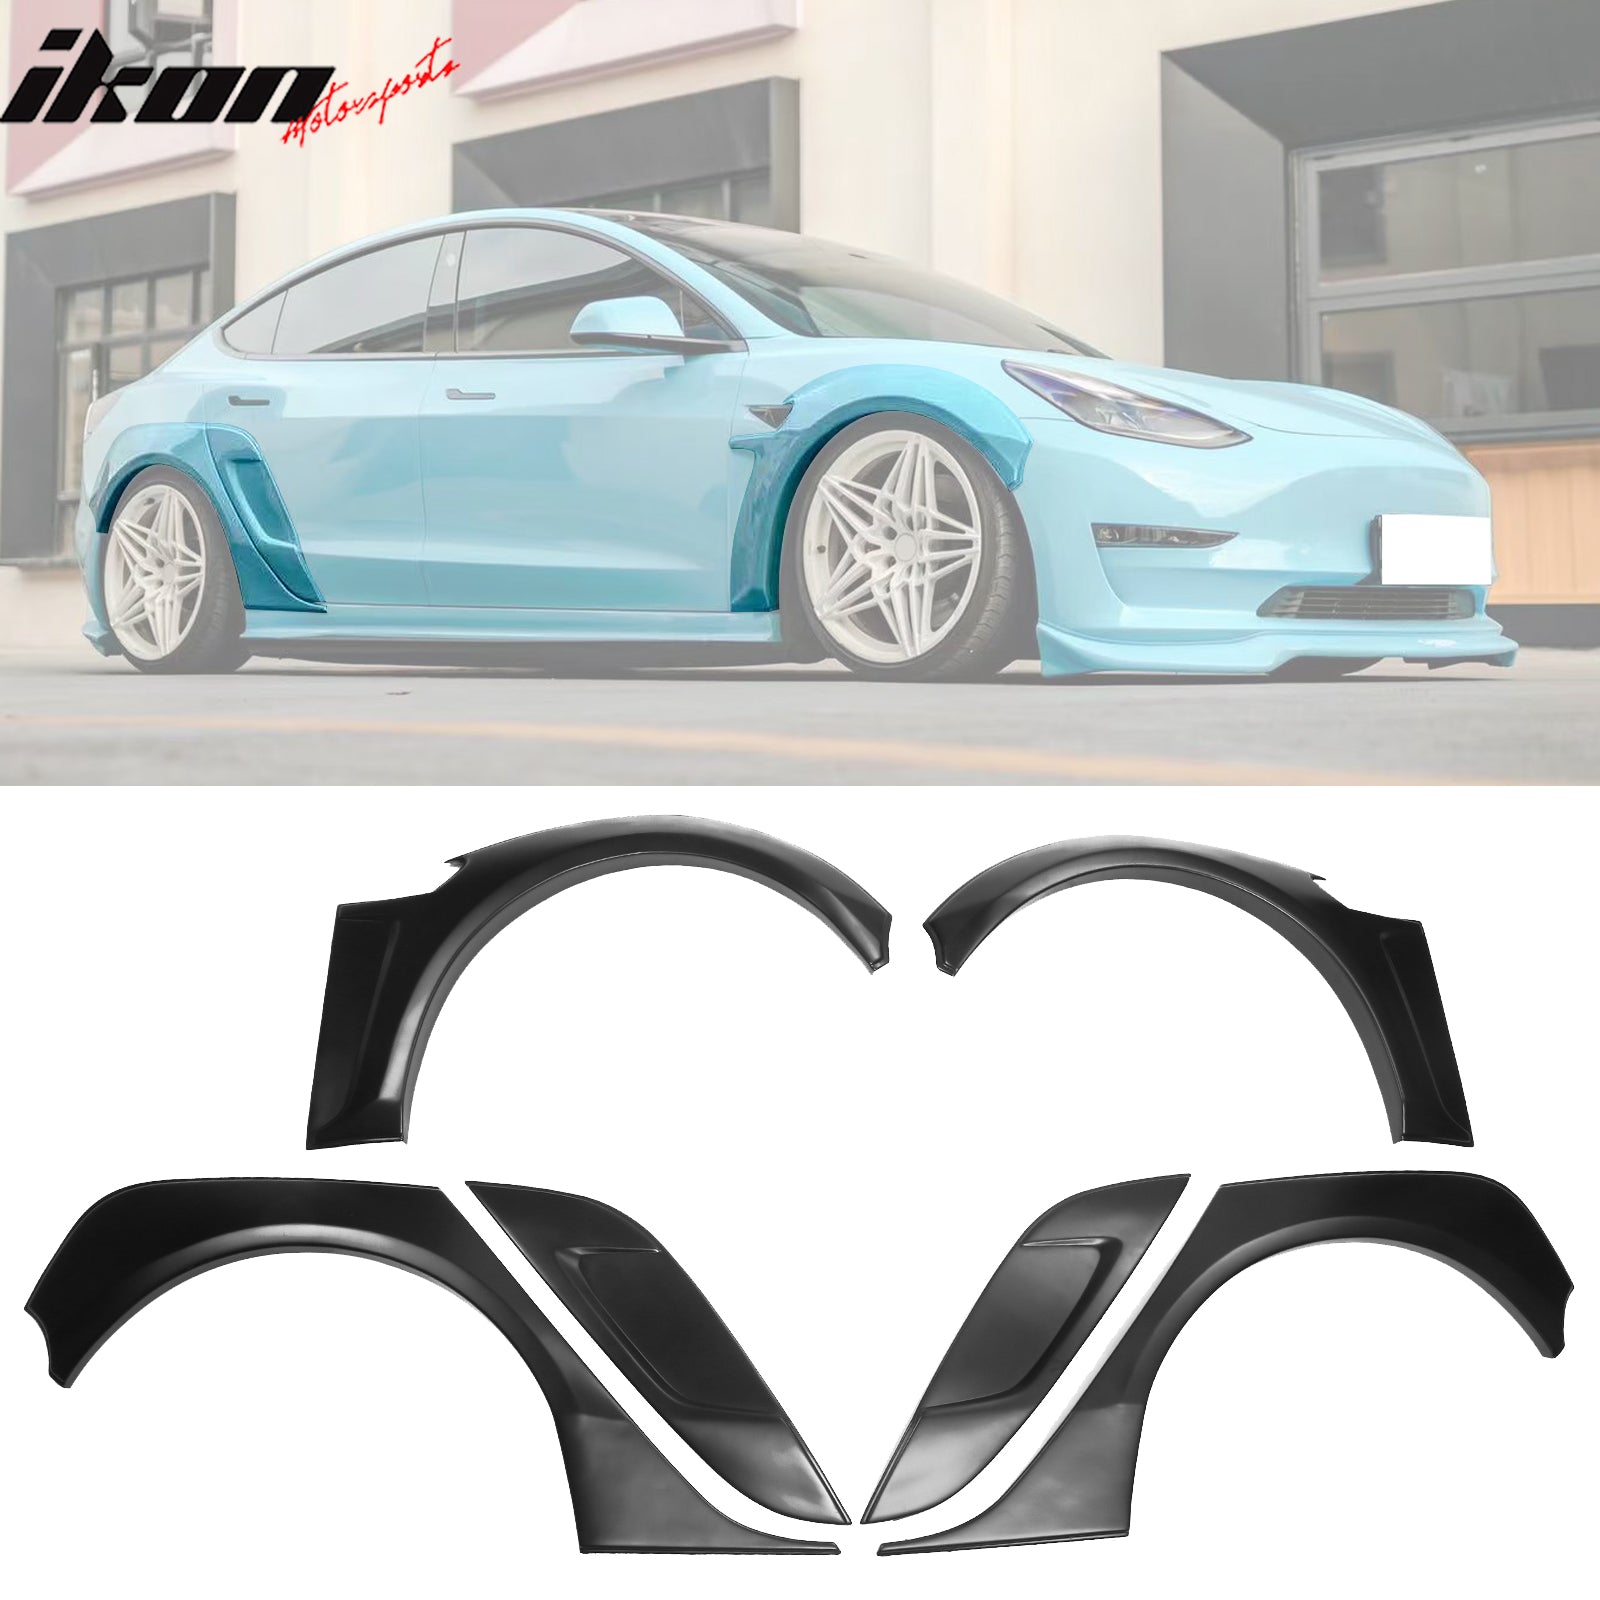 Wheel Cover Fender Flares Widebody Kit Parts Accessories for Tesla Model 3  s x y